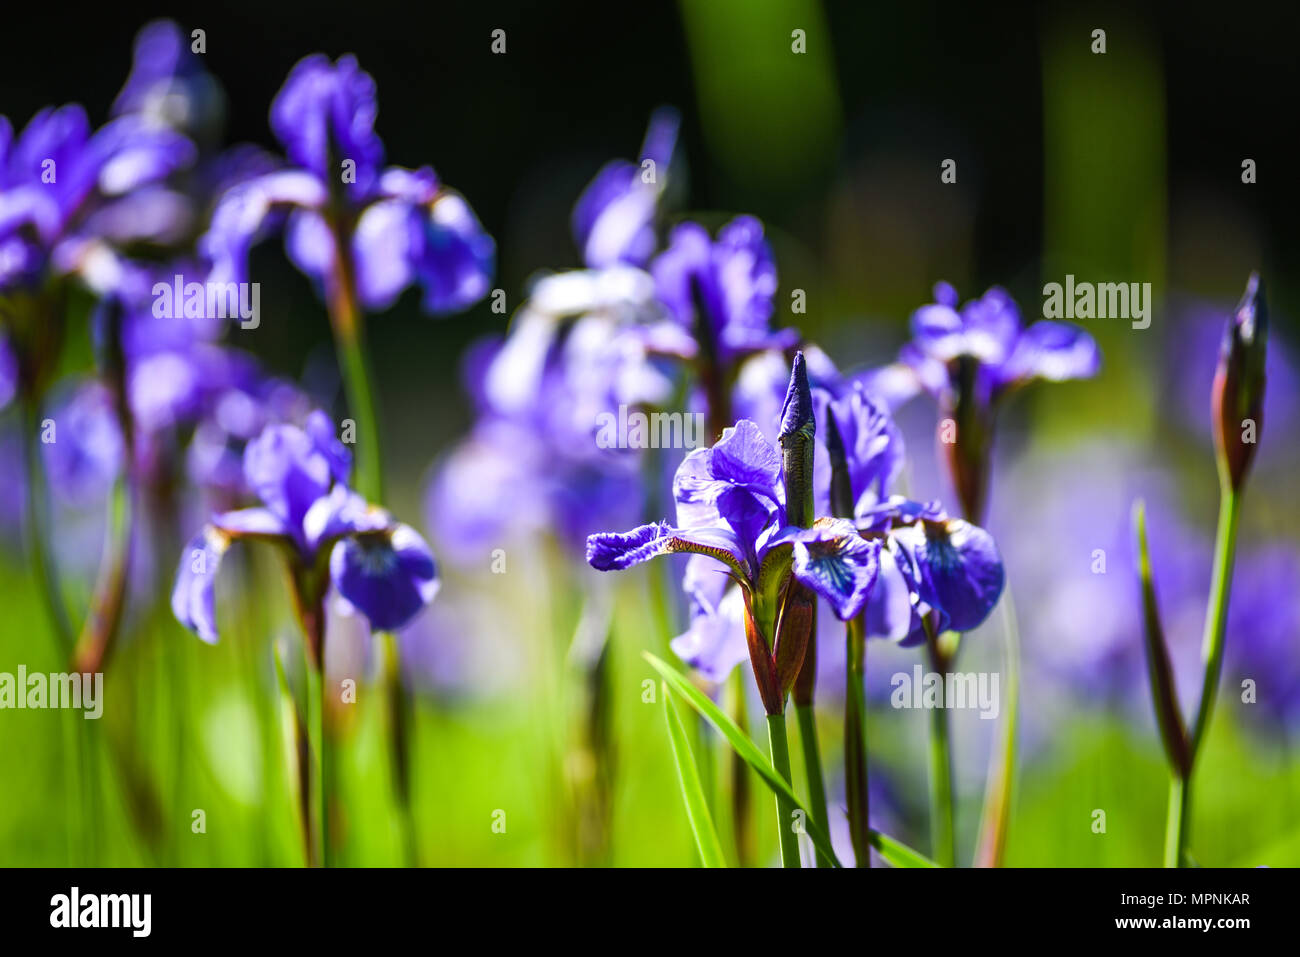 Blooming in the garden of purple spring flowers Stock Photo